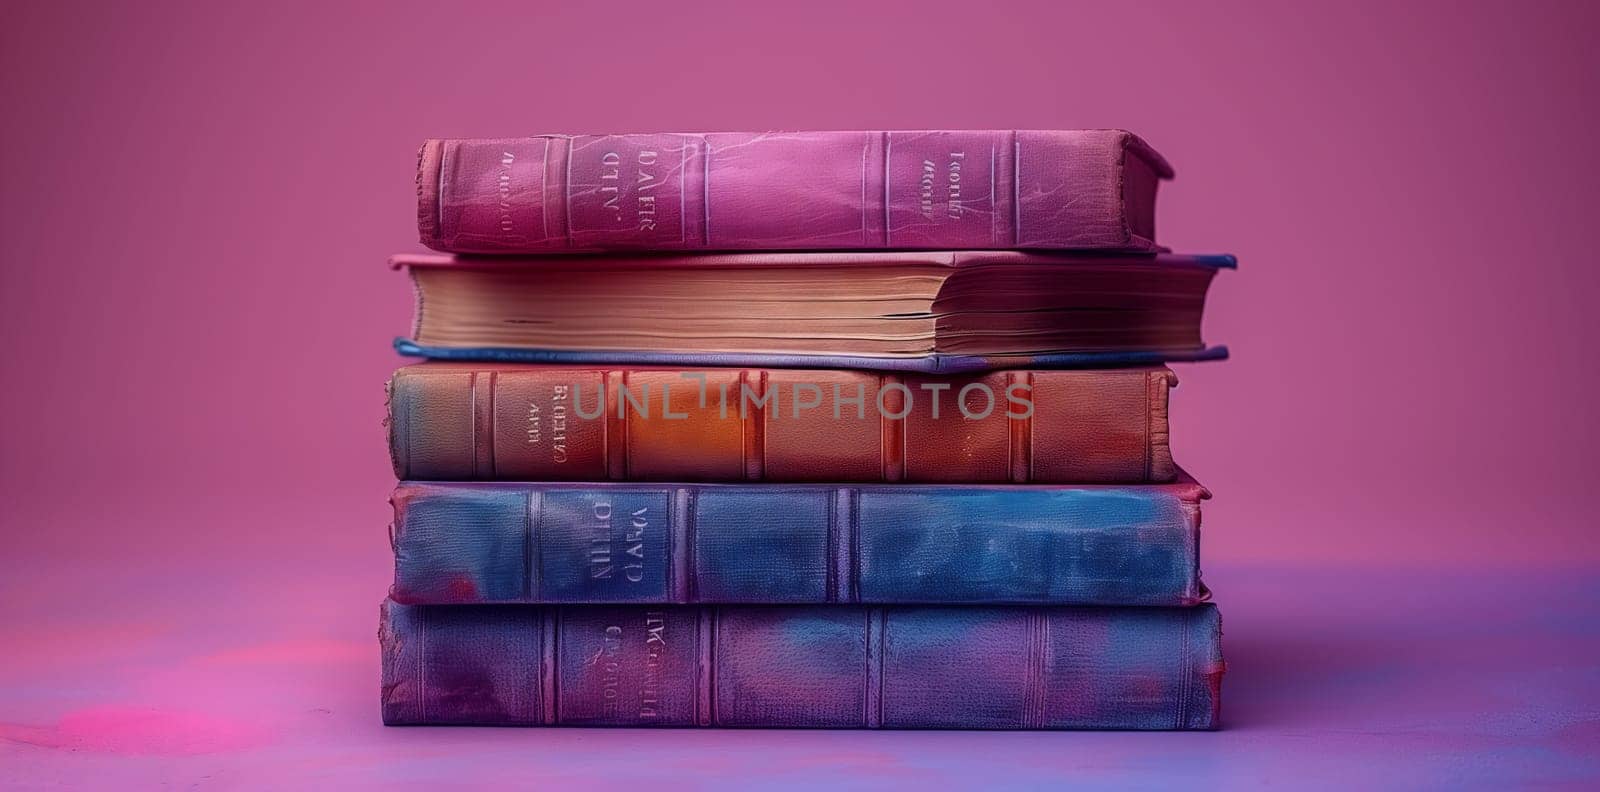 A stack of books in a violet rectangle on a pink background by richwolf